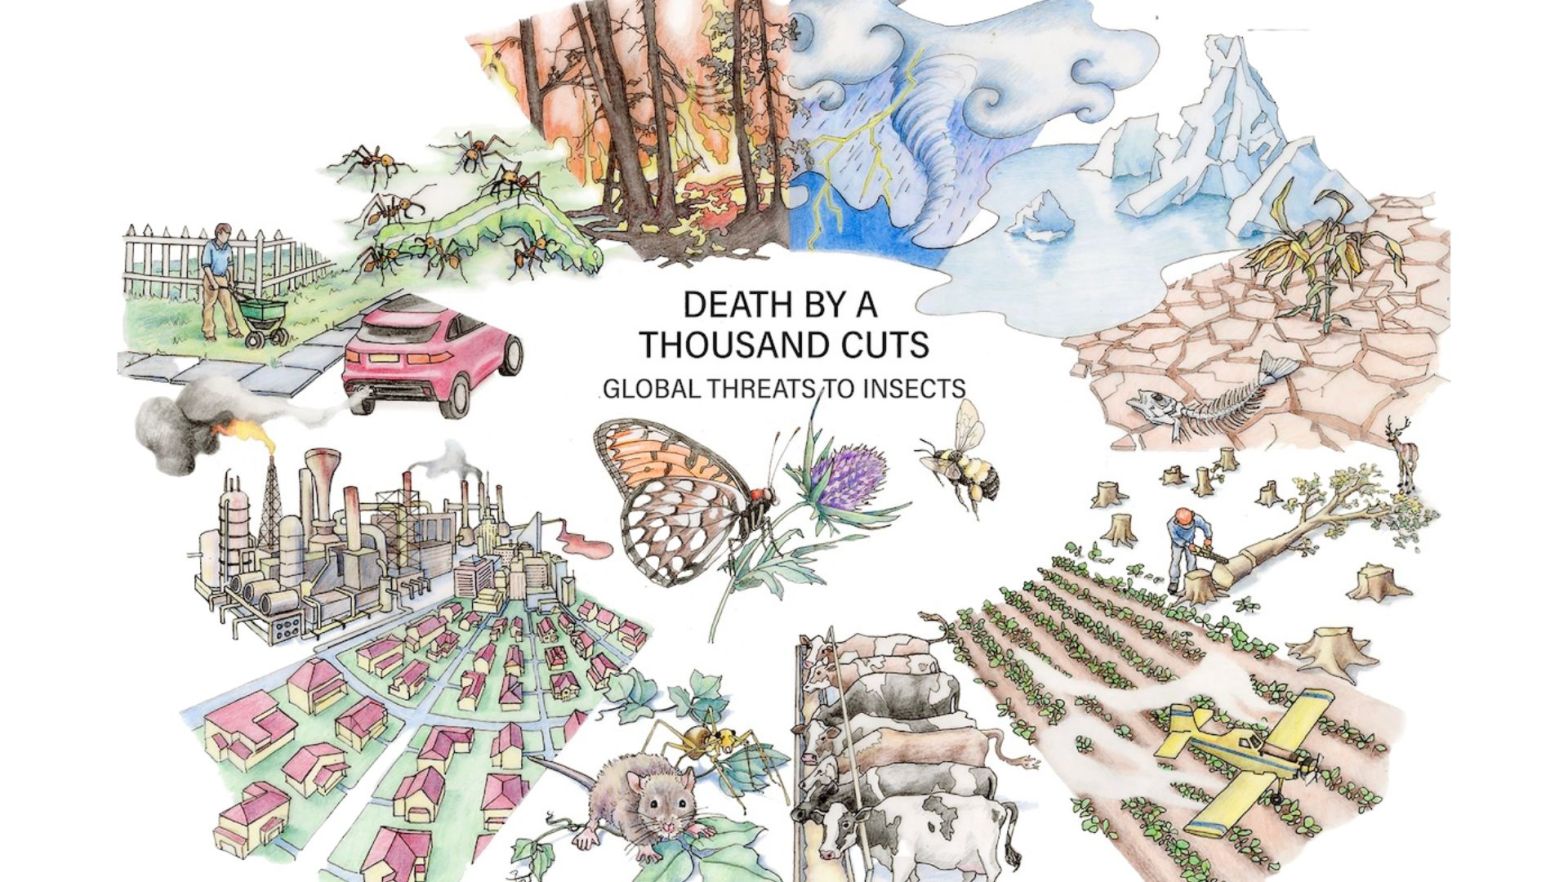 nsect decline in the Anthropocene: Death by a thousand cuts